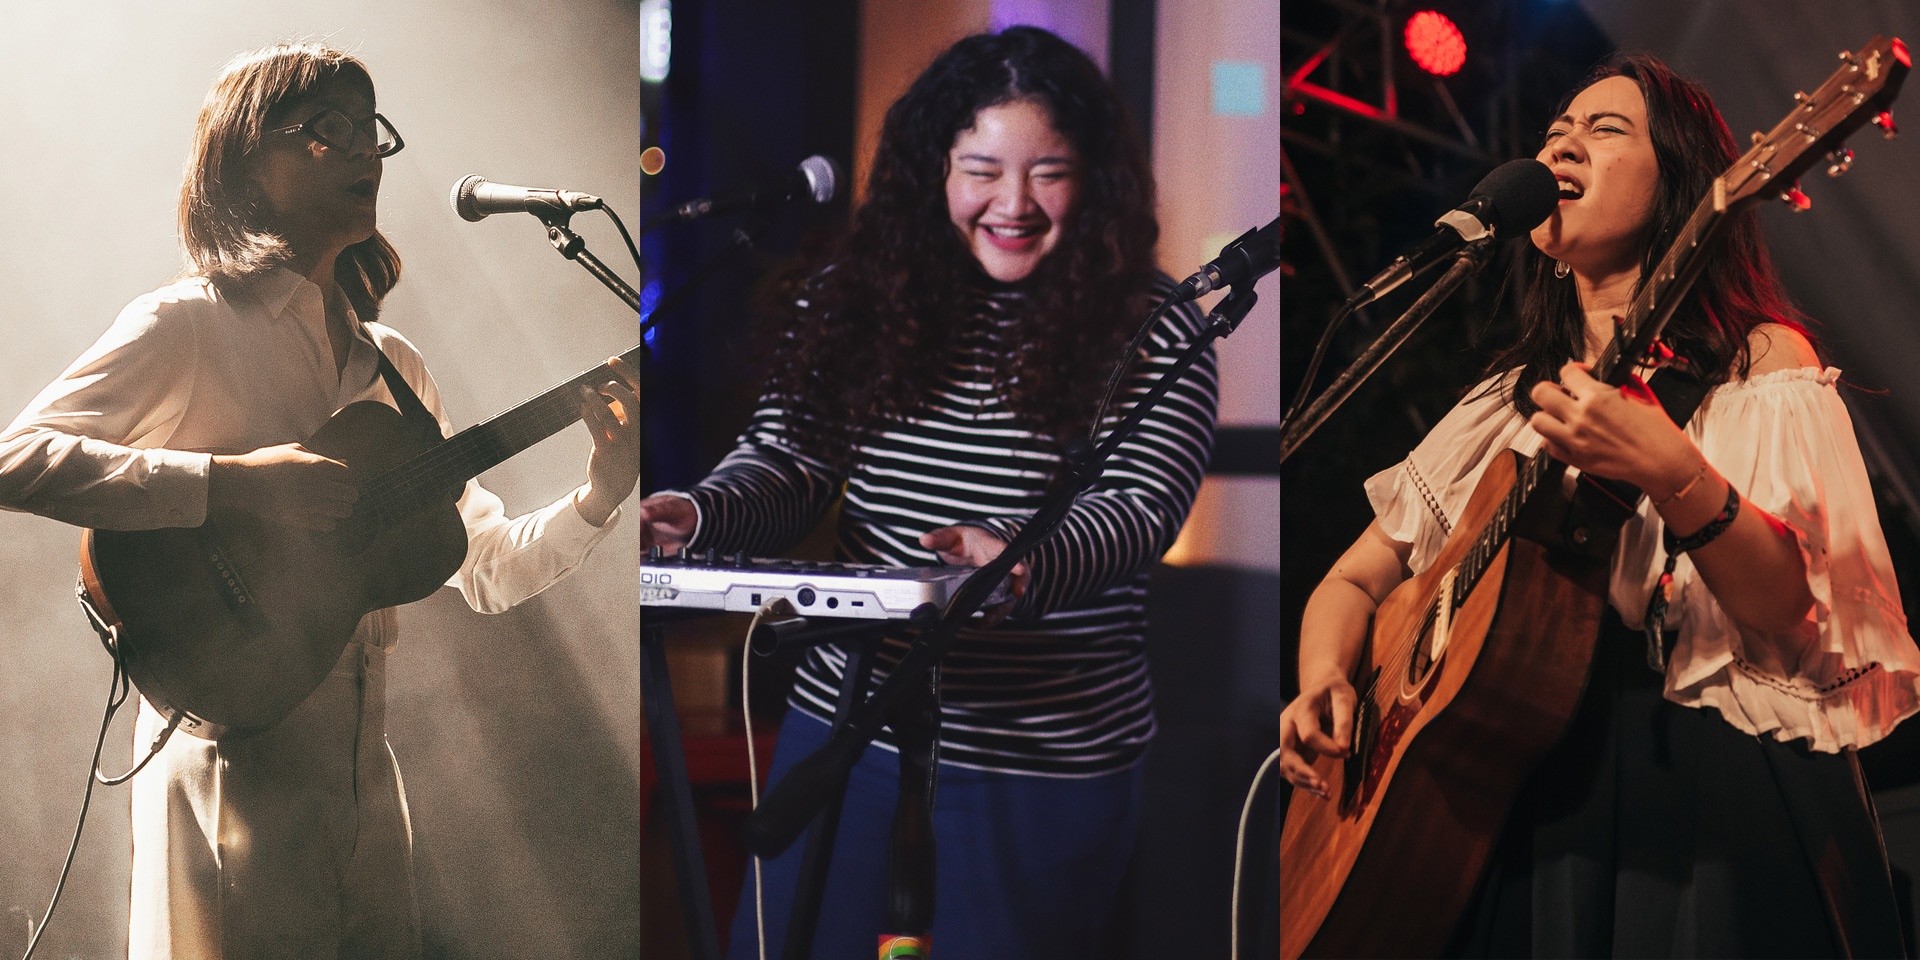 Unique, Ysanygo, Reese Lansangan, and more to perform at La Union Surfing Break 2019